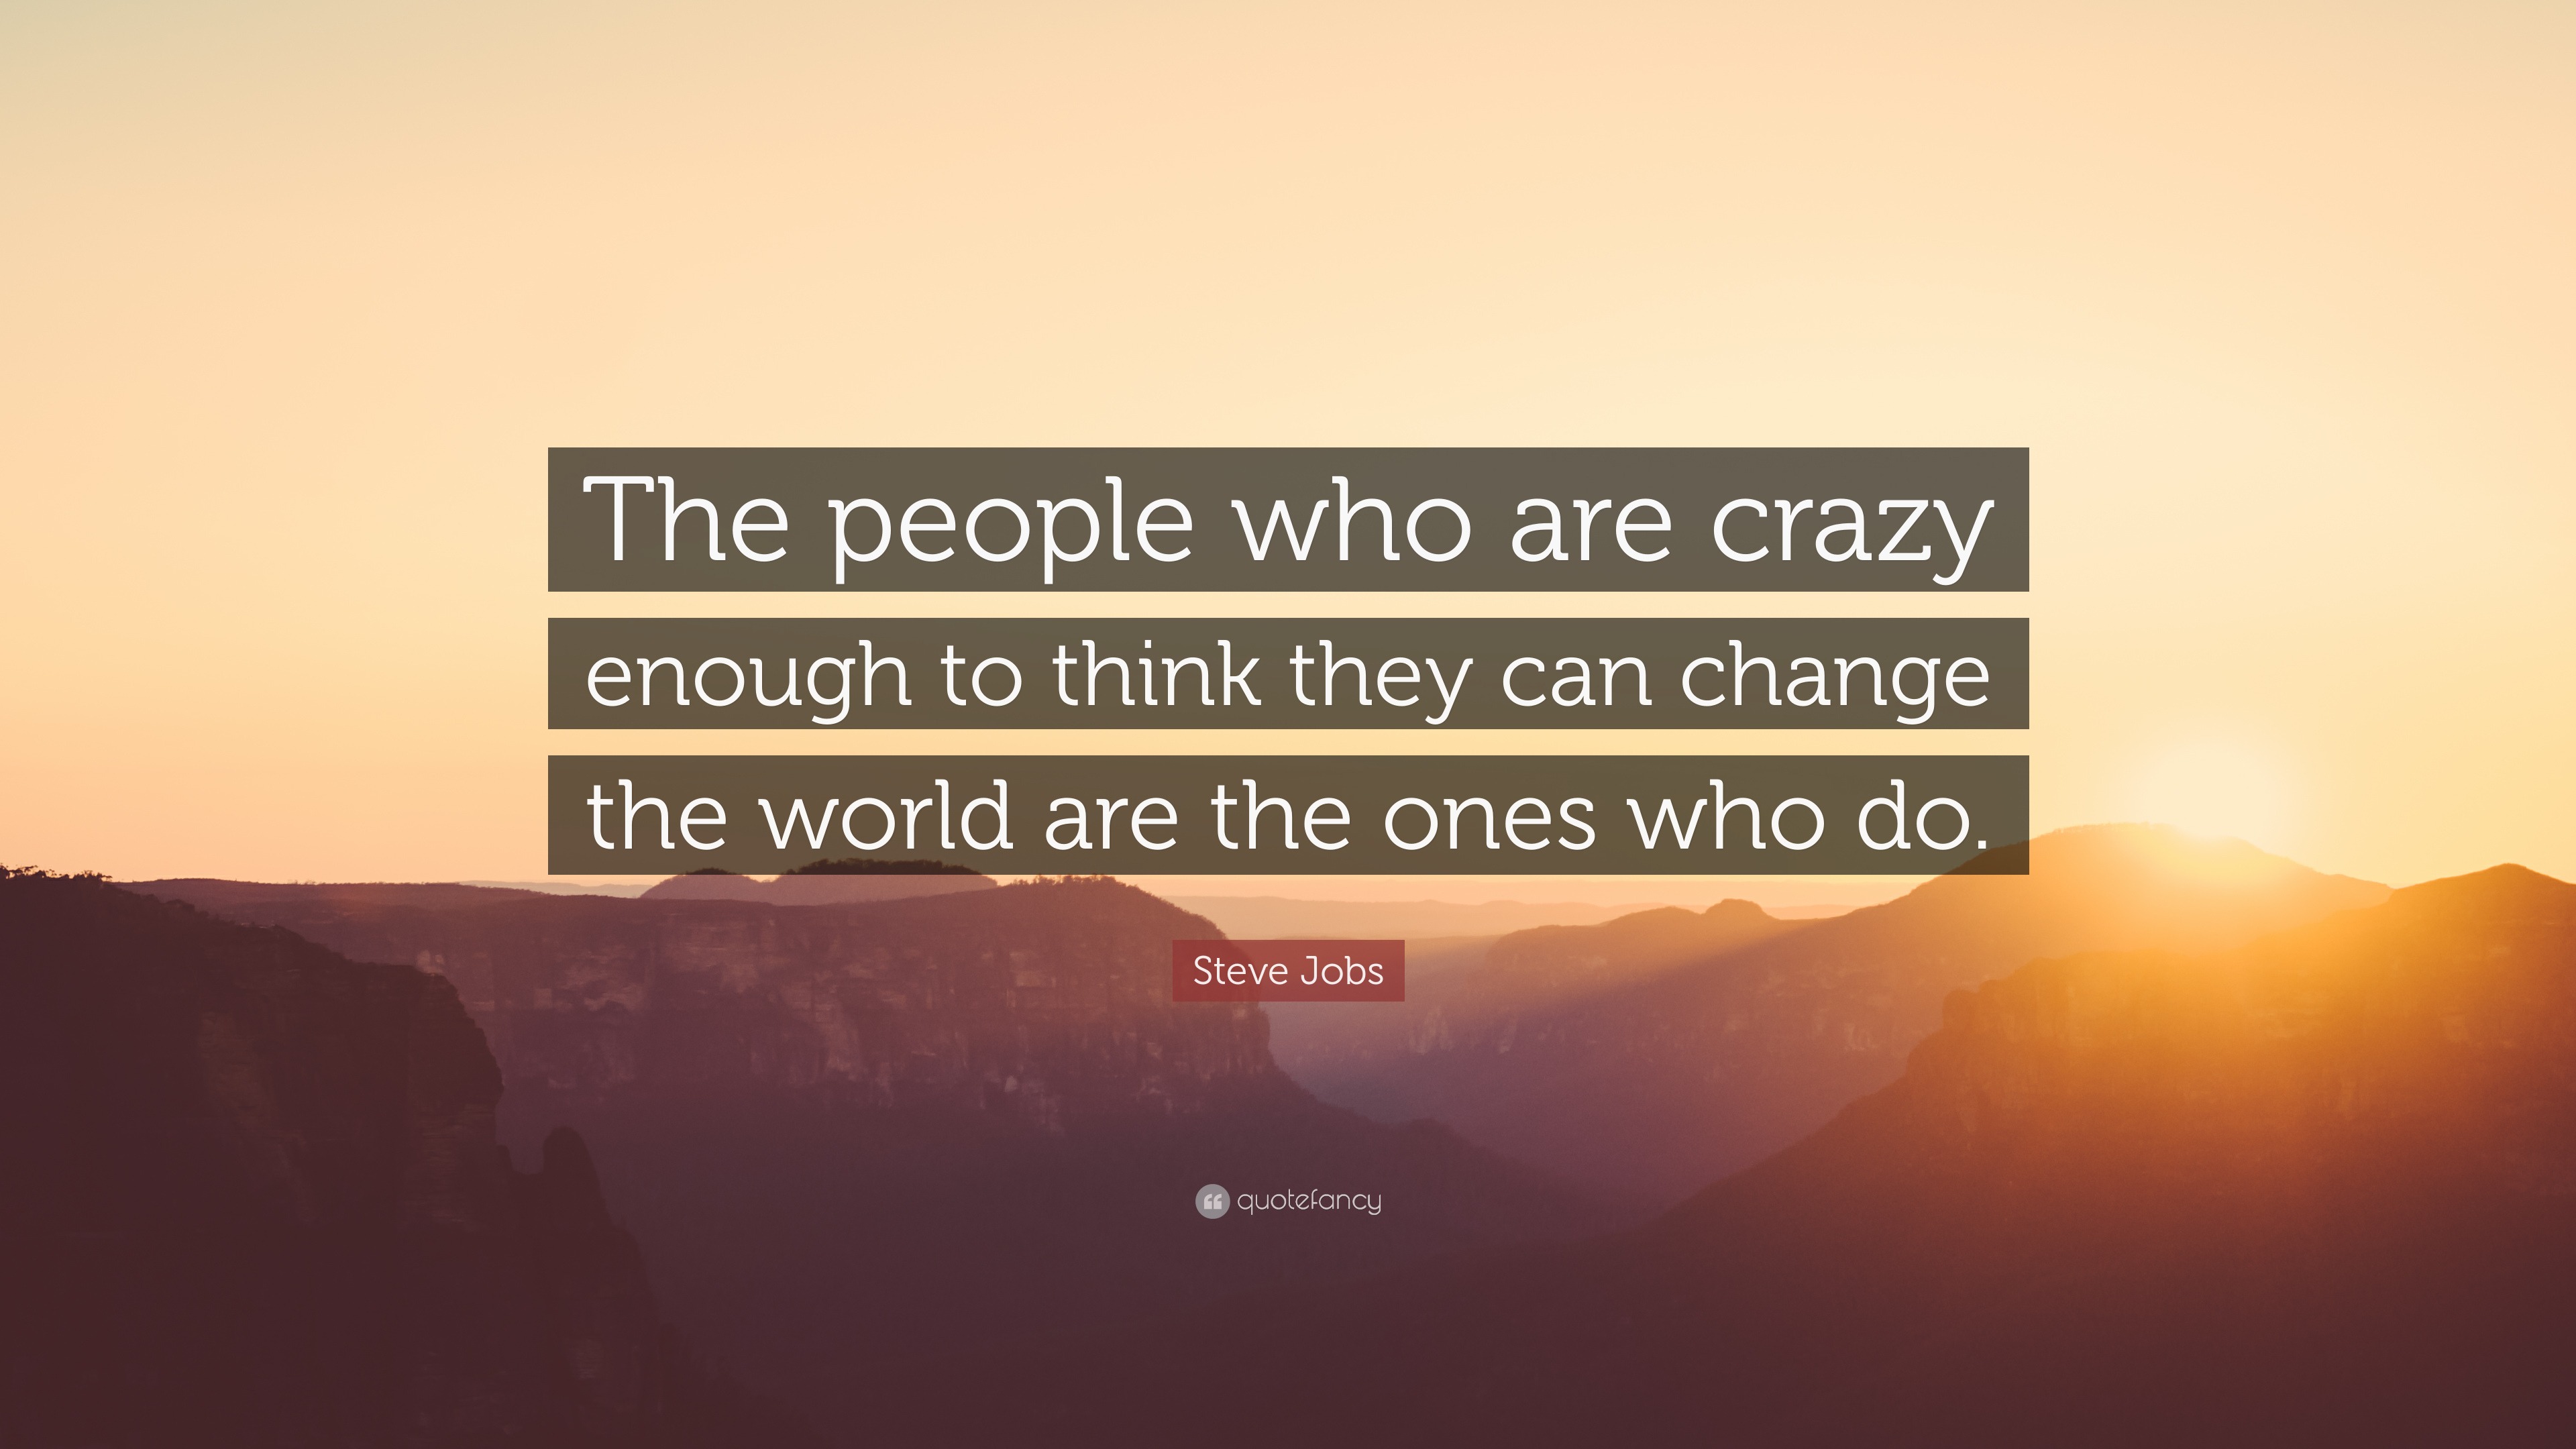 Steve Jobs Quote: “The people who are crazy enough to think they can ...